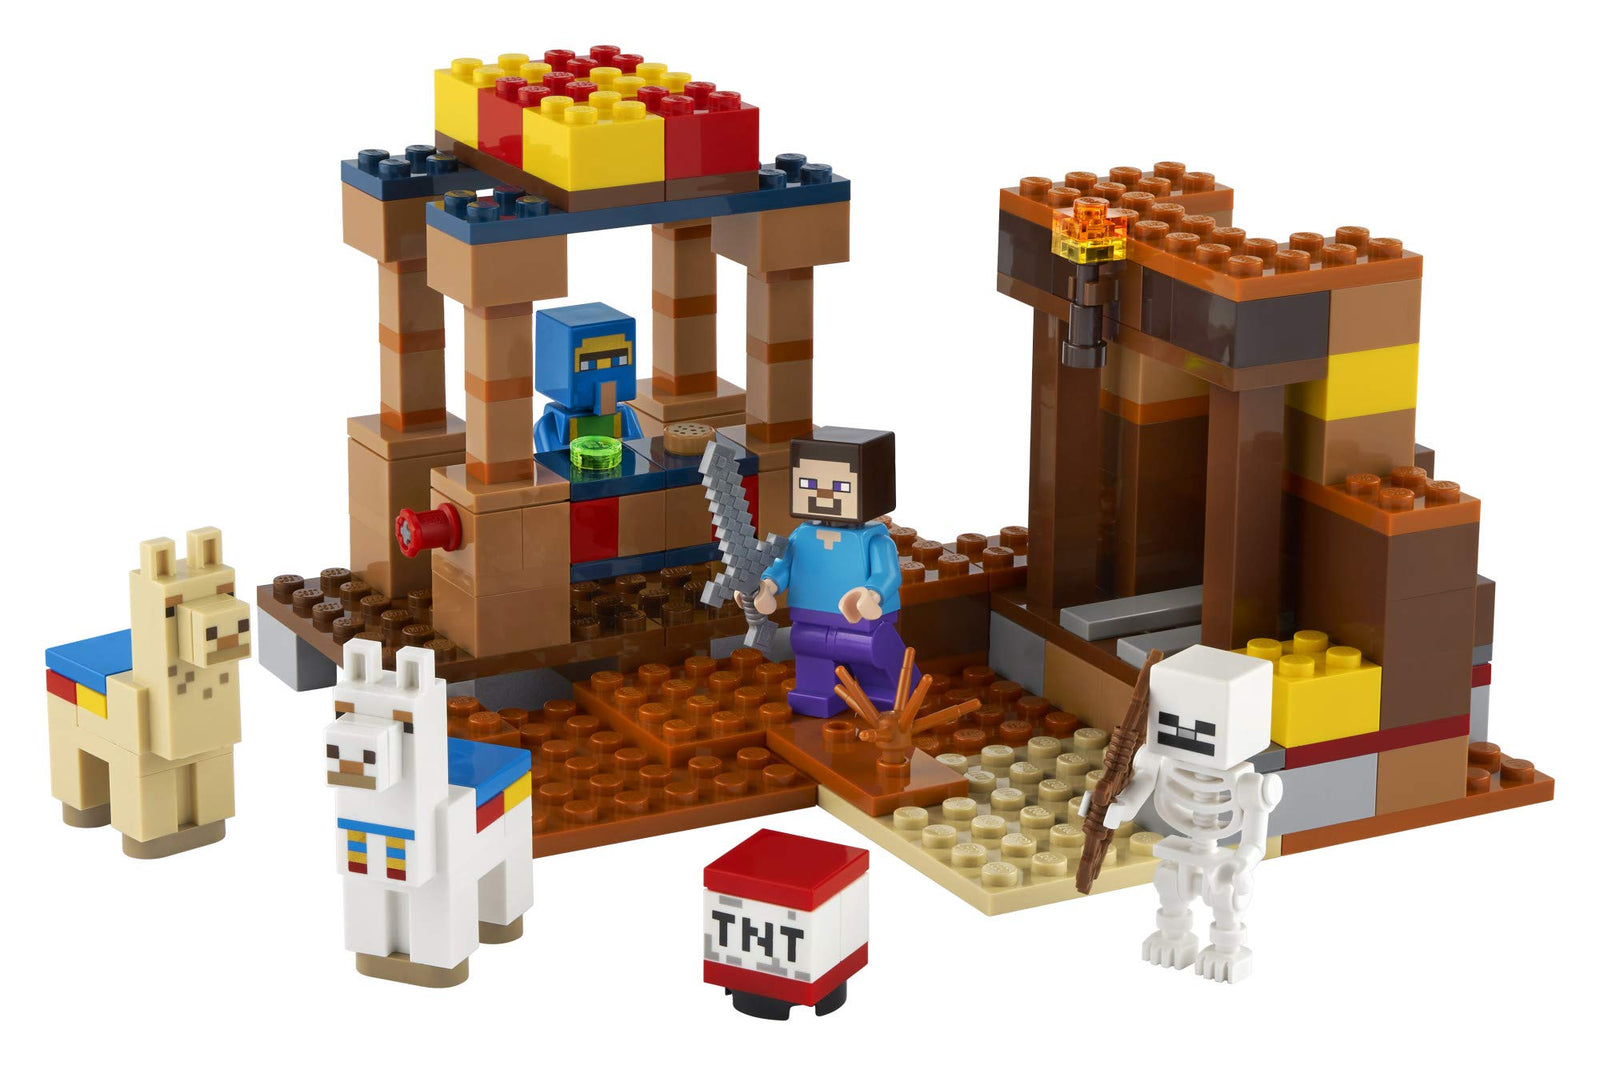 LEGO Minecraft The Trading Post 21167 Collectible Action-Figure Playset with Minecraft’s Steve and Skeleton Toys, New 2021 (201 Pieces)